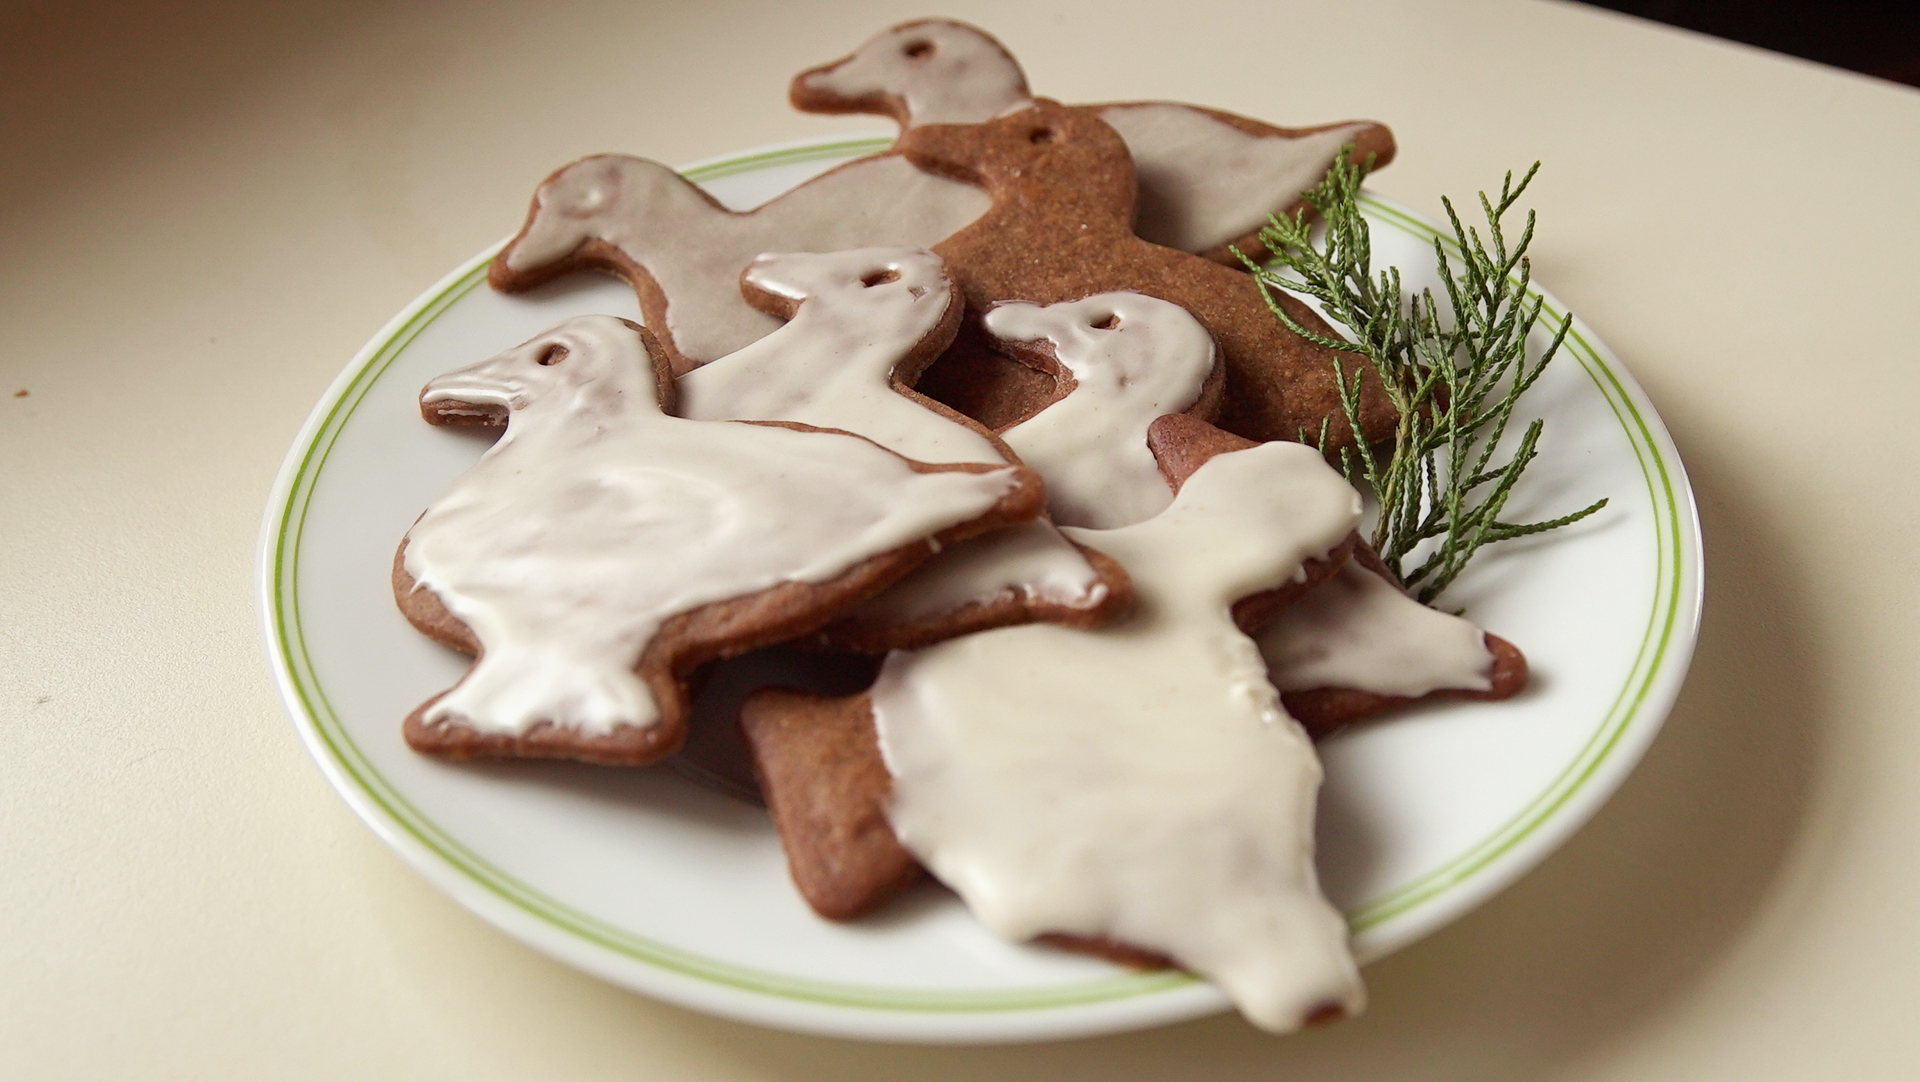 brown cookies shaped as ducks with white glaze arranged on a white plate with a sprig of pine